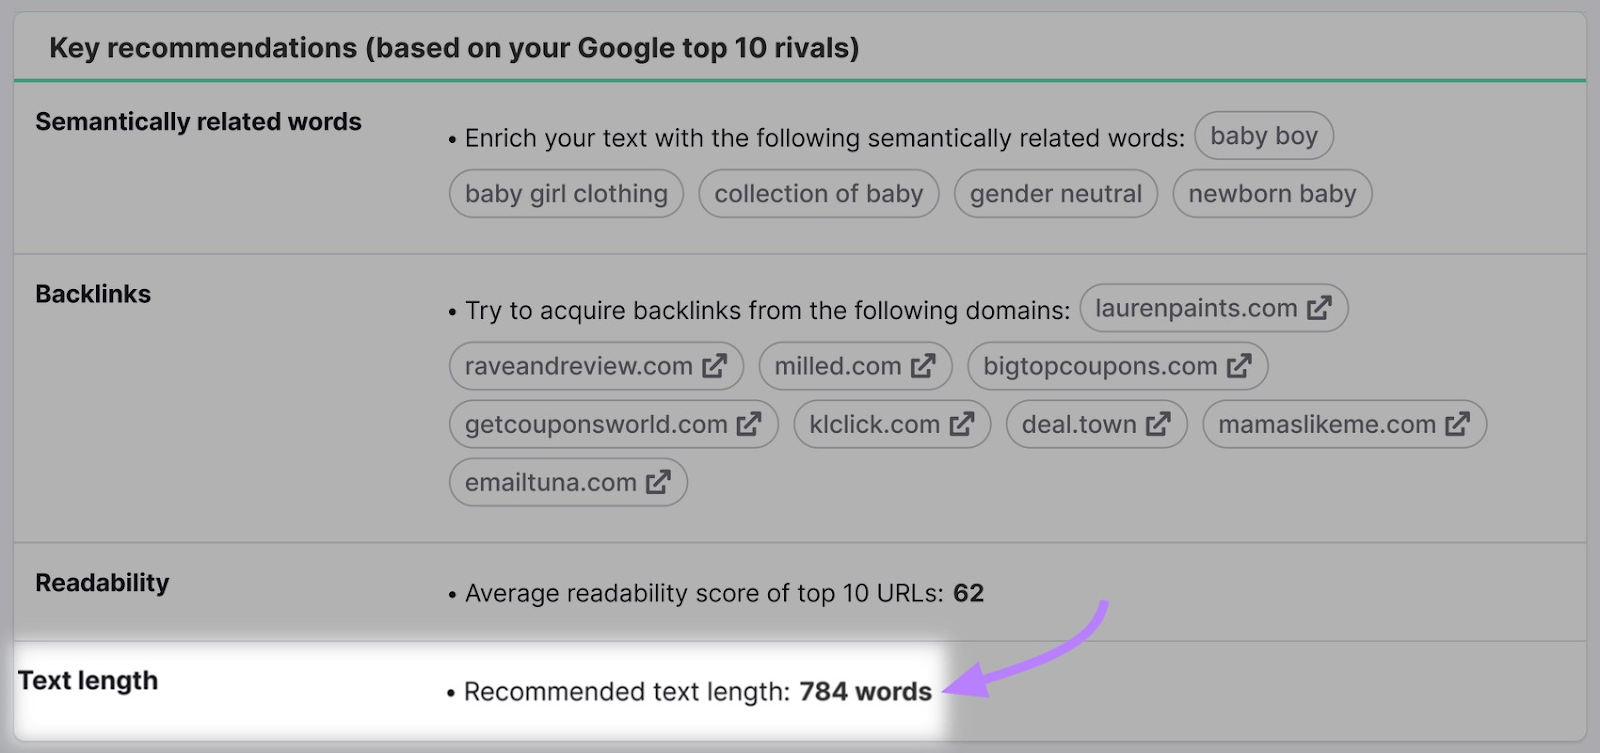 SEO Content Template tool recommends text length of 784 words based on top 10 rivals